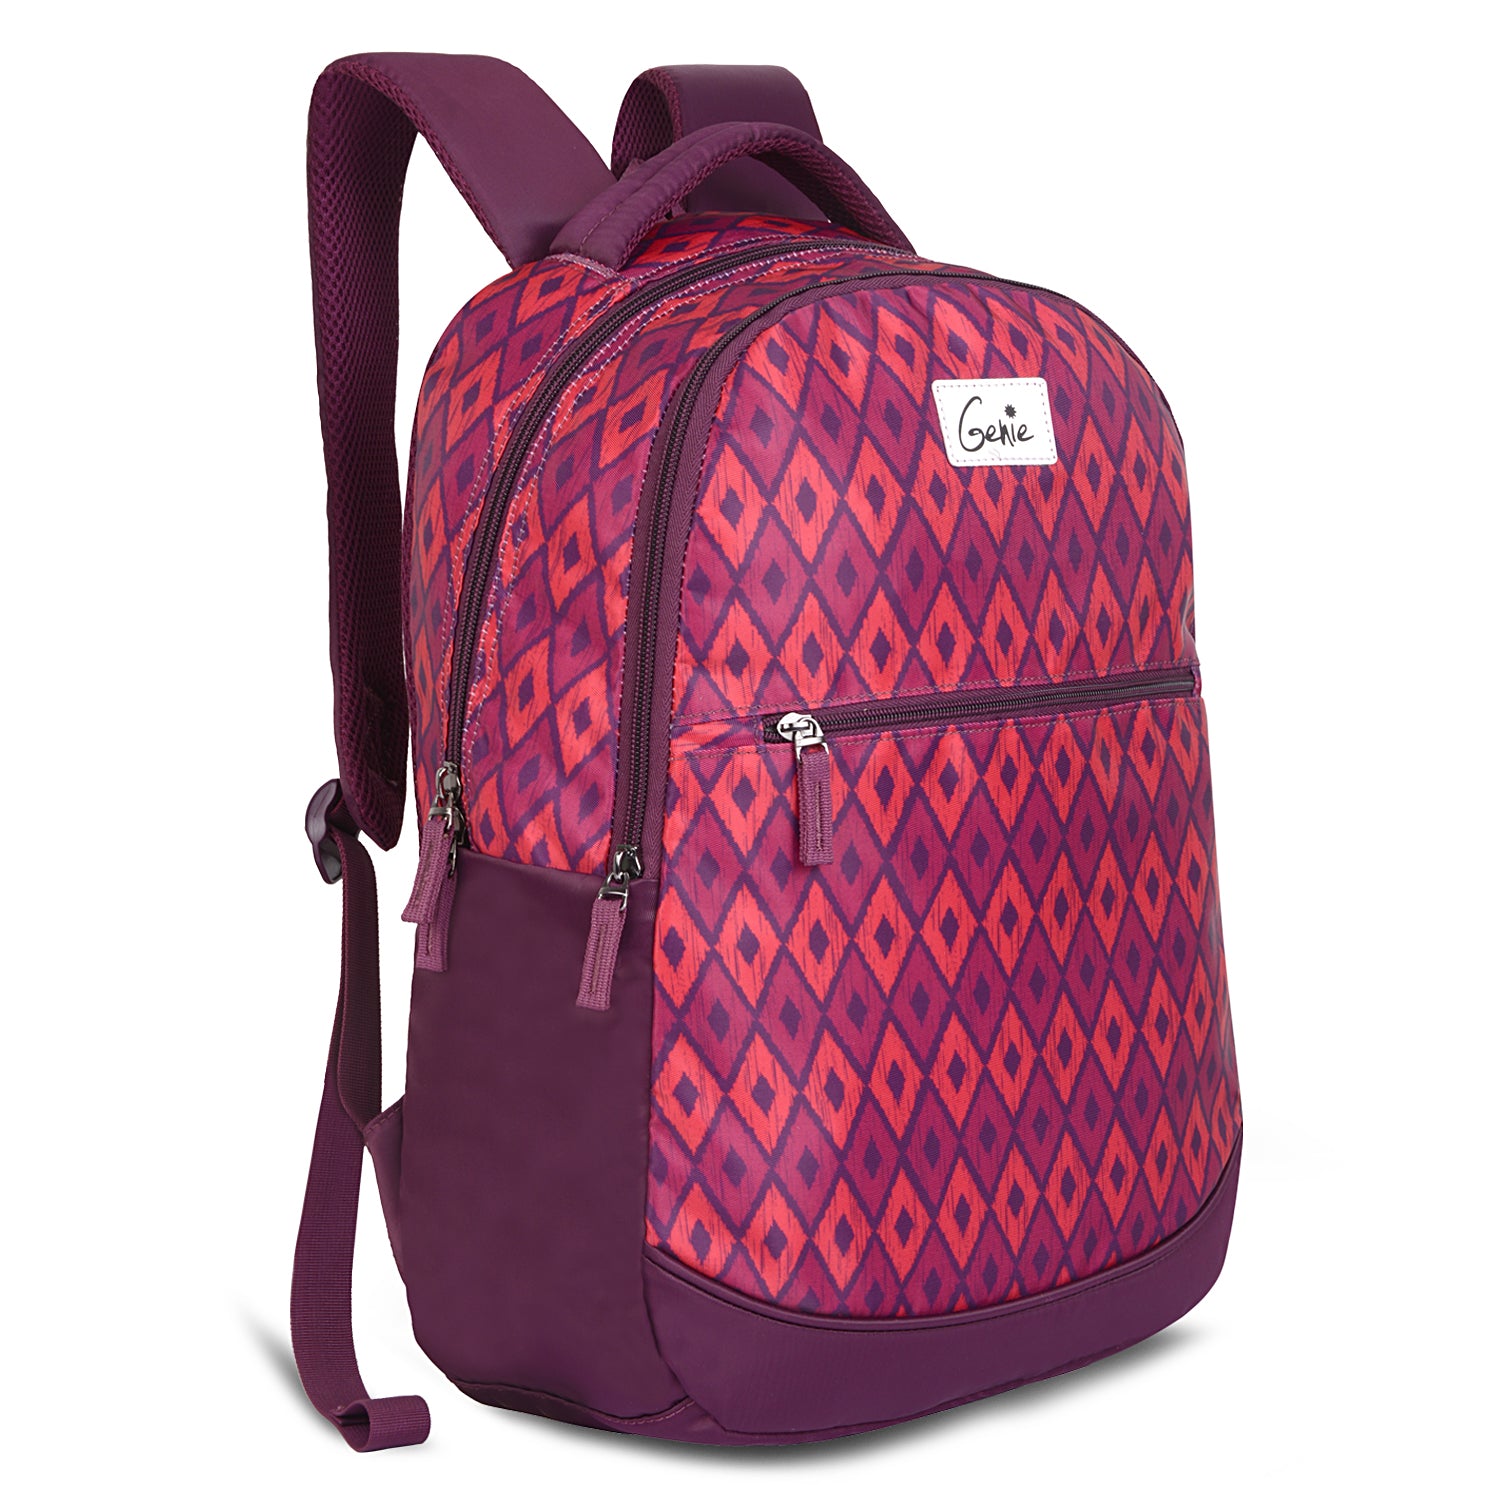 Genie Gypsy 27L Red Juniors Backpack With Easy Access Pockets